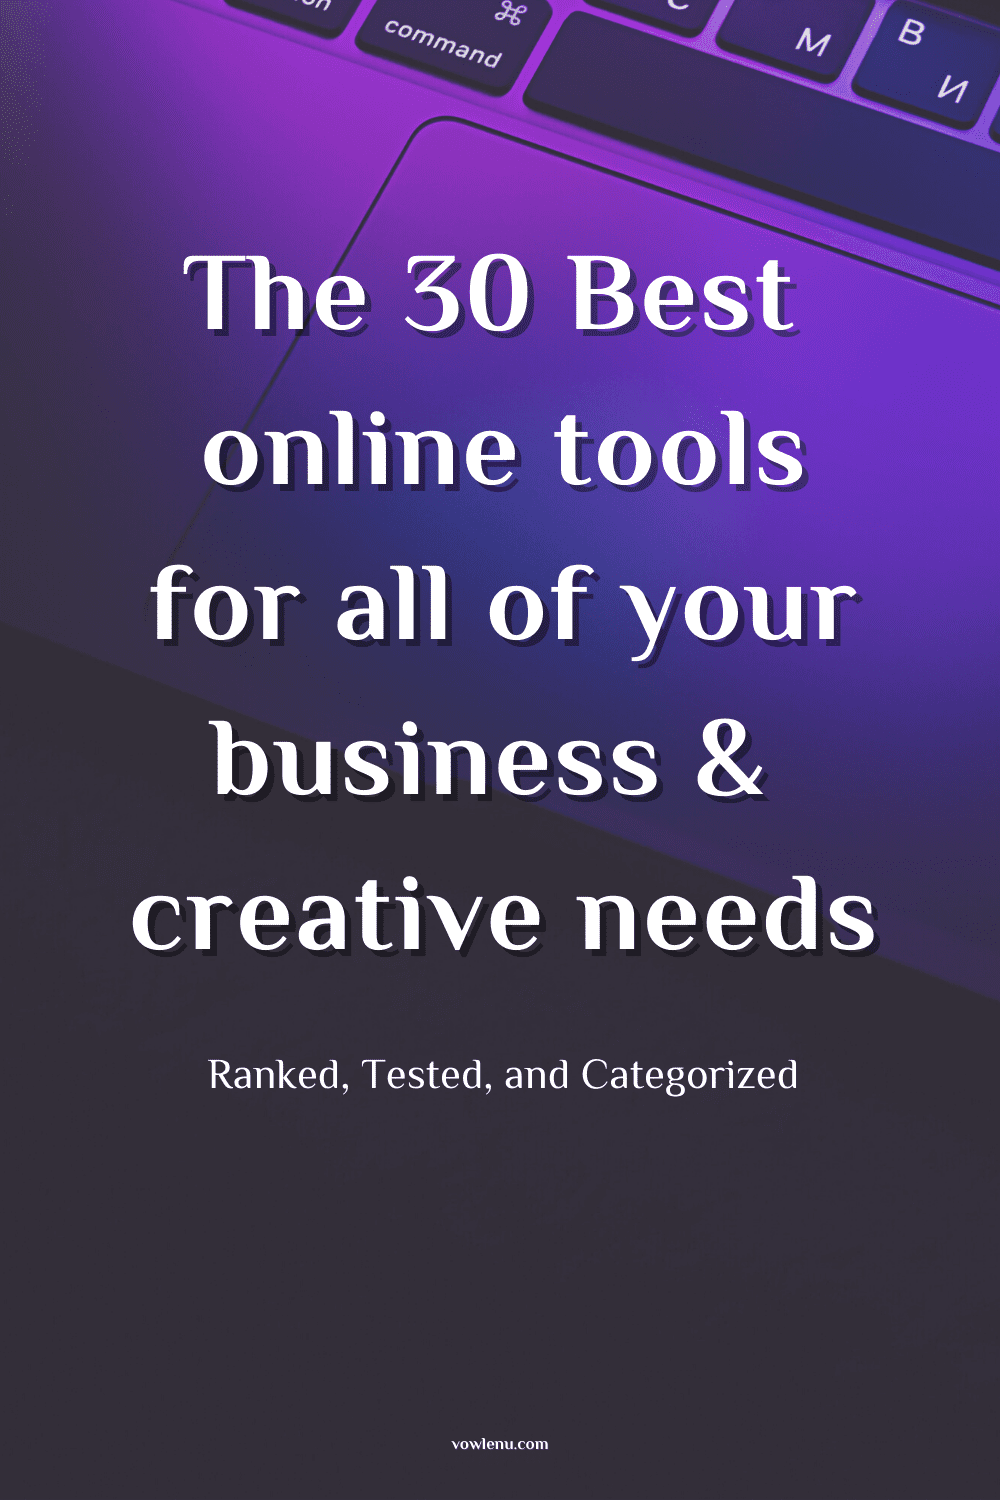 The 30 Best online tools for all of your business & creative needs 